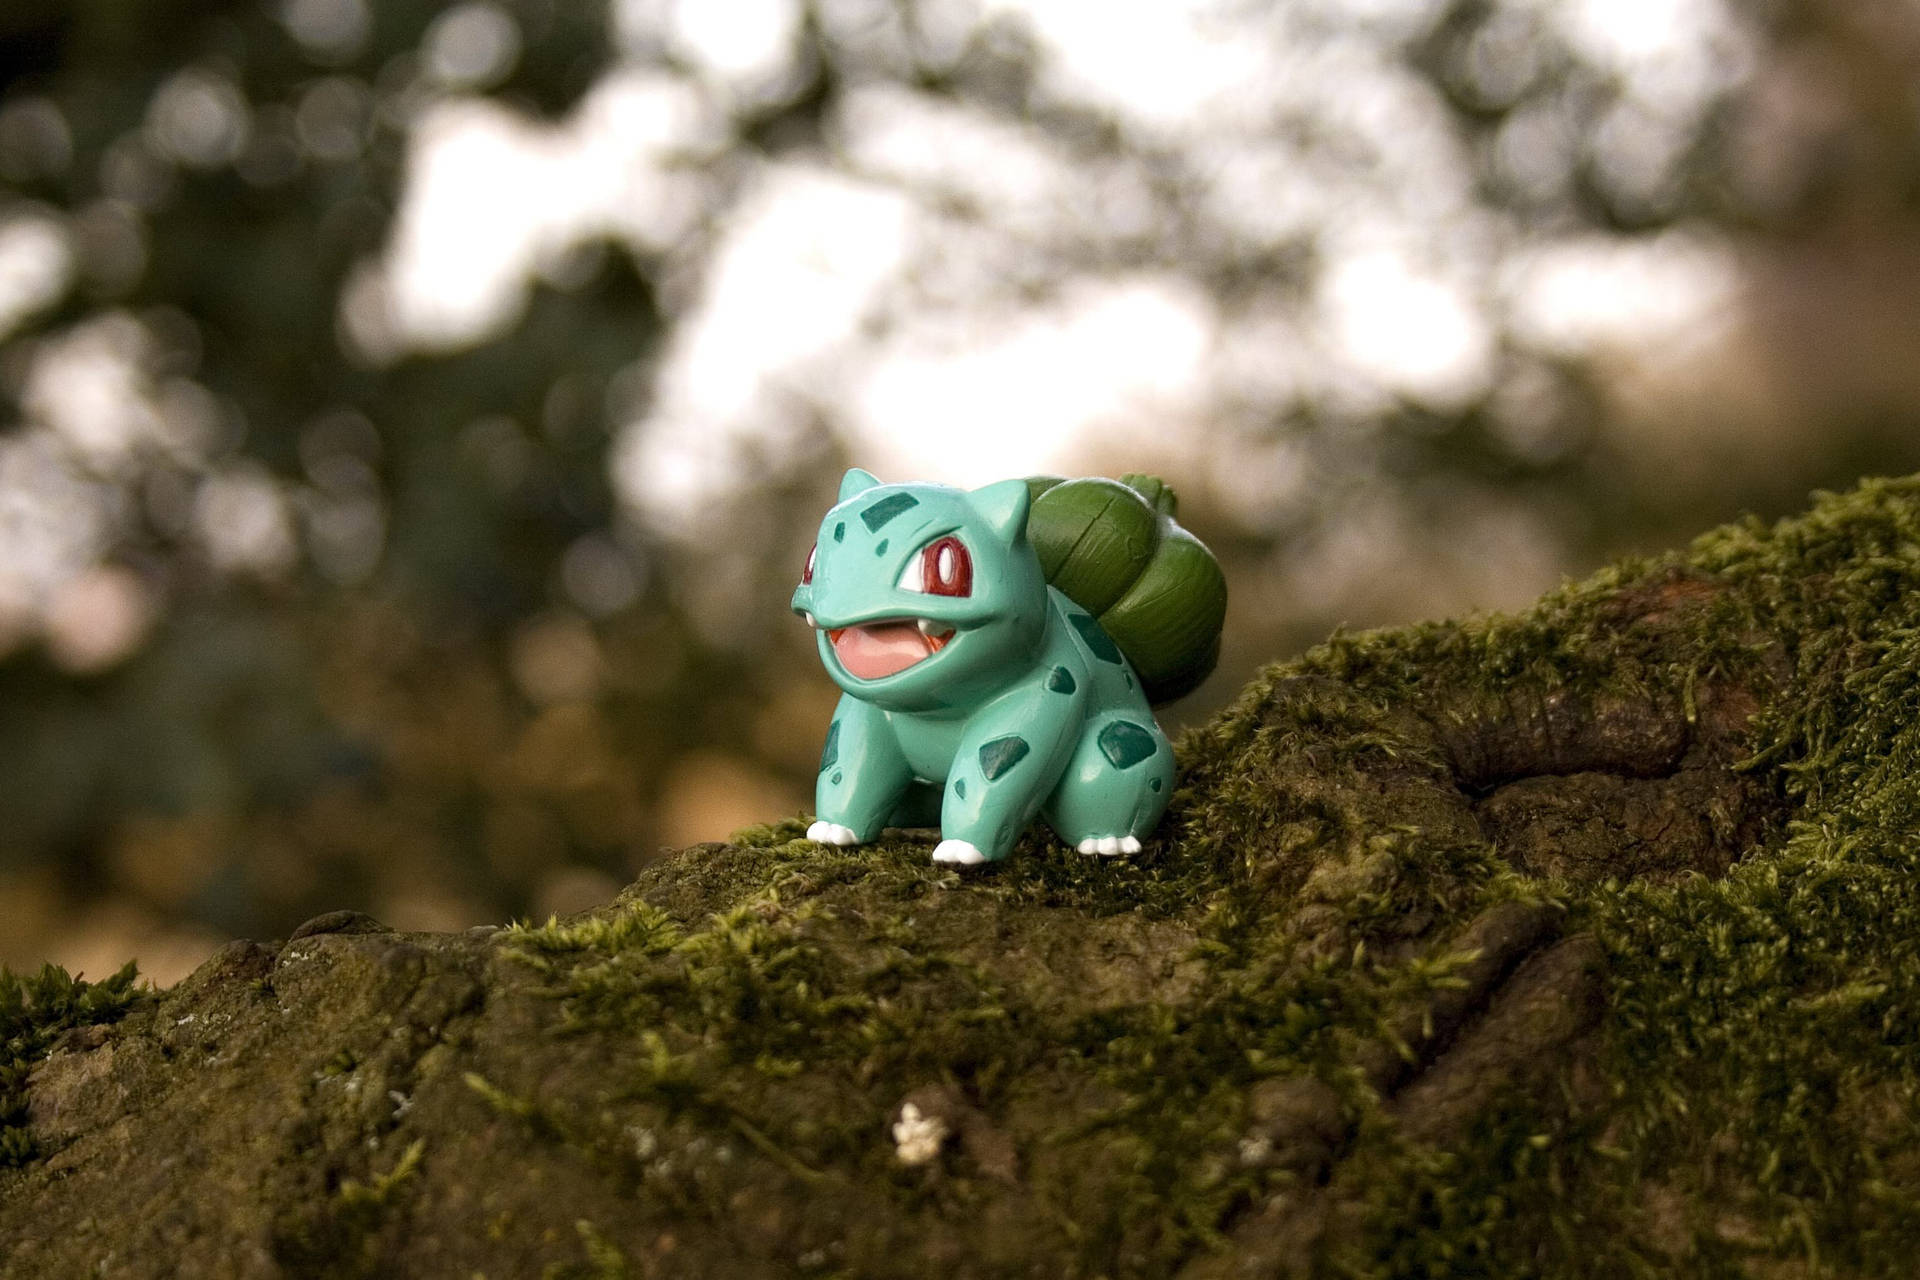 Get Your Own Tiny Bulbasaur Toy Wallpaper